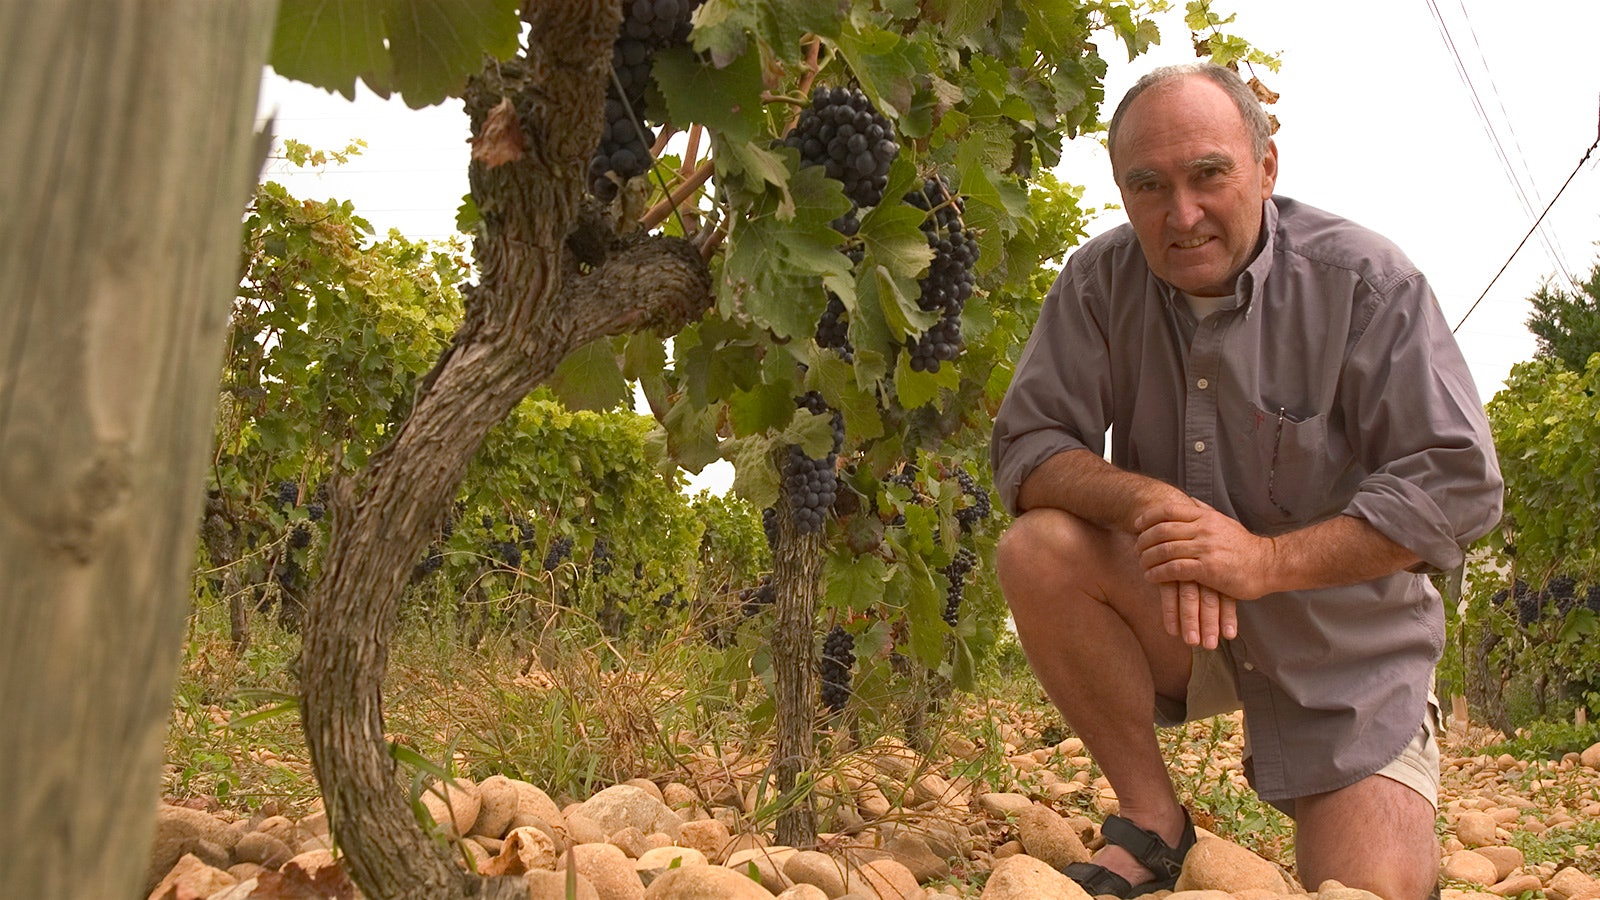  Alain Graillot found winemaking greatness in the rocky soils of the Northern Rhône Valley.